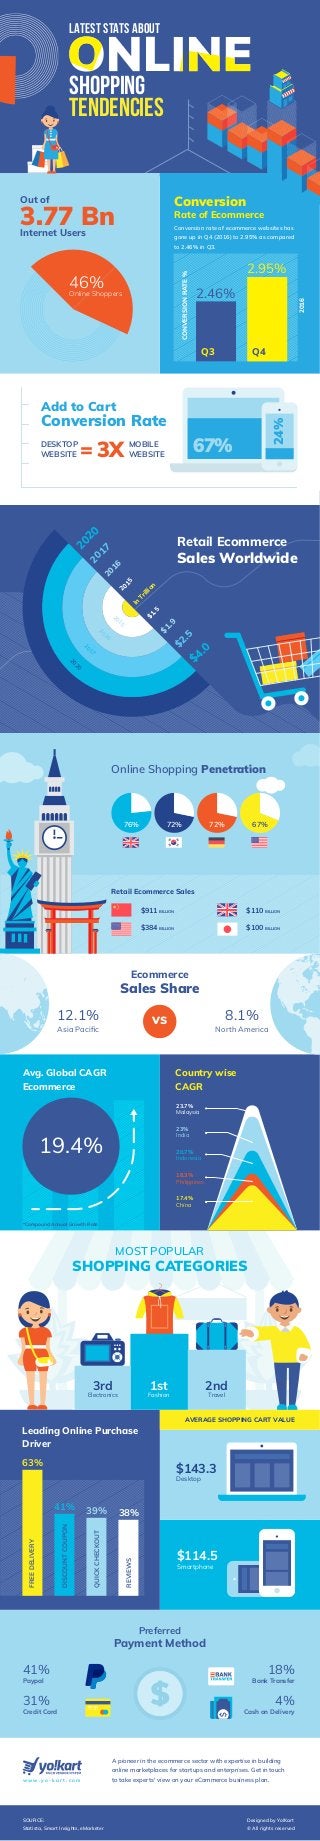 2015
2015
2016
2017
2020
$1.5
2016
$1.9
2017
$2.5
2020
$4.0
In
Trillion
Retail Ecommerce
Sales Worldwide
LATEST STATS ABOUT
SHOPPING
TENDENCIES
Conversion
Rate of Ecommerce
Add to Cart
Conversion Rate
= 3XDESKTOP
WEBSITE
MOBILE
WEBSITE
2.46%
2.95%
CONVERSIONRATE%
2016
Conversion rate of ecommerce websites has
gone up in Q4 (2016) to 2.95% as compared
to 2.46% in Q3.
Out of
3.77 BnInternet Users
Q3 Q4
46%
Online Shoppers
67%
24%
Ecommerce
Sales Share
vs
Online Shopping Penetration
Retail Ecommerce Sales
$911 BILLION
$384 BILLION
$110 BILLION
$100 BILLION
8.1%
North America
12.1%
Asia Paciﬁc
Avg. Global CAGR
Ecommerce
MOST POPULAR
SHOPPING CATEGORIES
Country wise
CAGR
19.4%
17.4%
18.3%
20.7%
23%
23.7%
China
Philippines
Indonesia
India
Malaysia
76% 72% 72% 67%
$143.3
Desktop
$114.5
Smartphone
AVERAGE SHOPPING CART VALUE
SOURCE:
Statista, Smart Insights, eMarketer
w w w . y o - k a r t . c o m
Designed by Yo!Kart
© All rights reserved
A pioneer in the ecommerce sector with expertise in building
online marketplaces for startups and enterprises. Get in touch
to take experts' view on your eCommerce business plan.
63%
41% 39% 38%
FREEDELIVERY
DISCOUNTCOUPON
QUICKCHECKOUT
REVIEWS
Leading Online Purchase
Driver
Preferred
Payment Method
Cash on Delivery
Bank Transfer
Credit Card
Paypal
4%
18%
31%
41%
1st
Fashion
2nd
Travel
3rd
Electronics
*Compound Annual Growth Rate
 